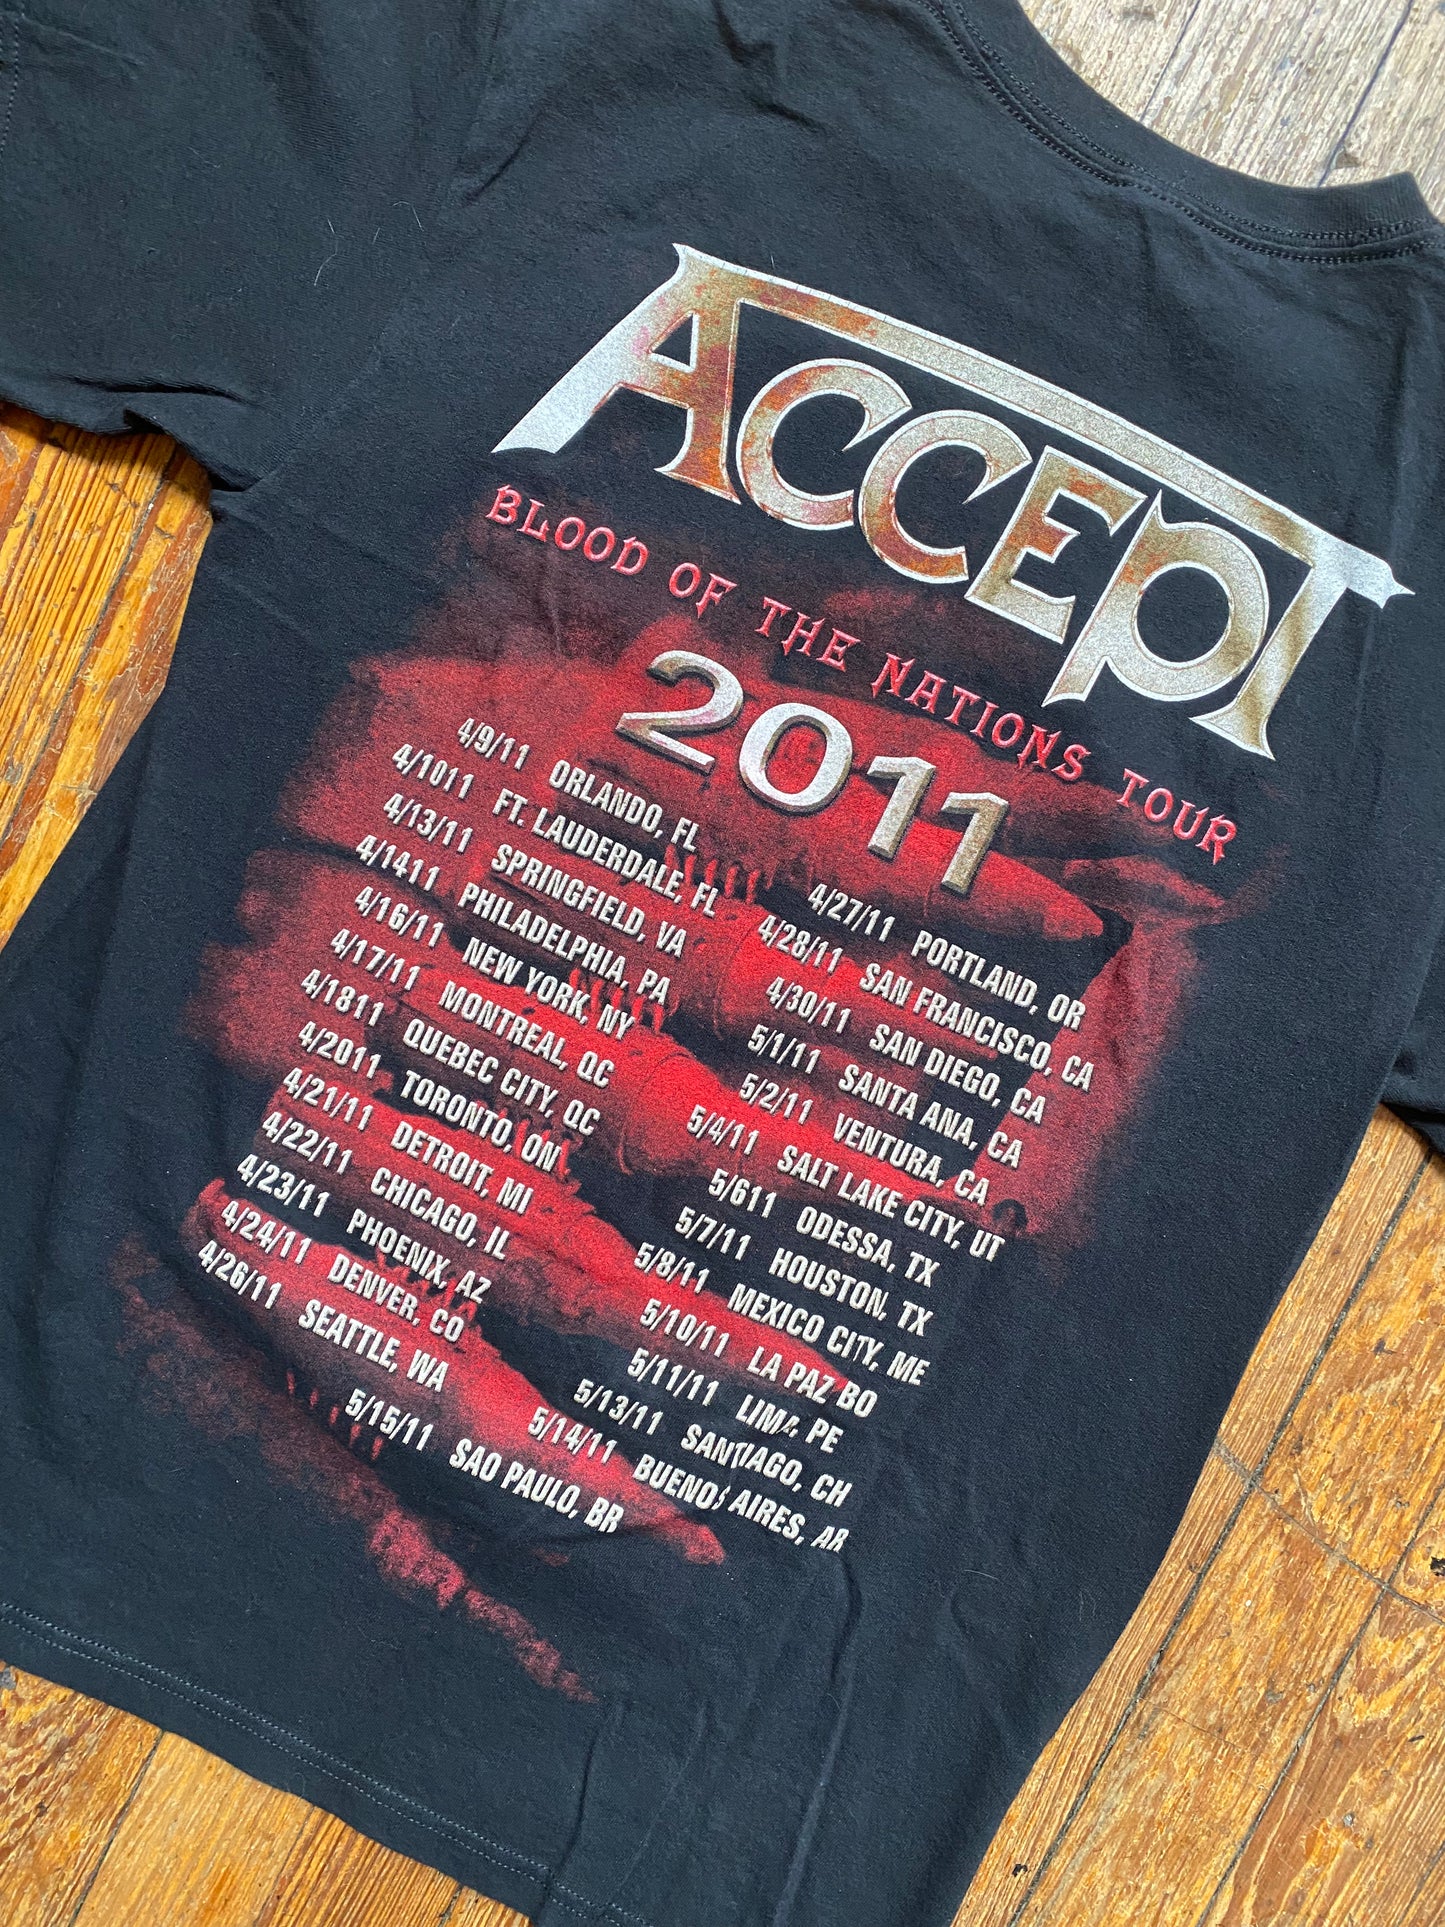 Accept “Blood of the Nations” 2011 Tour Shirt